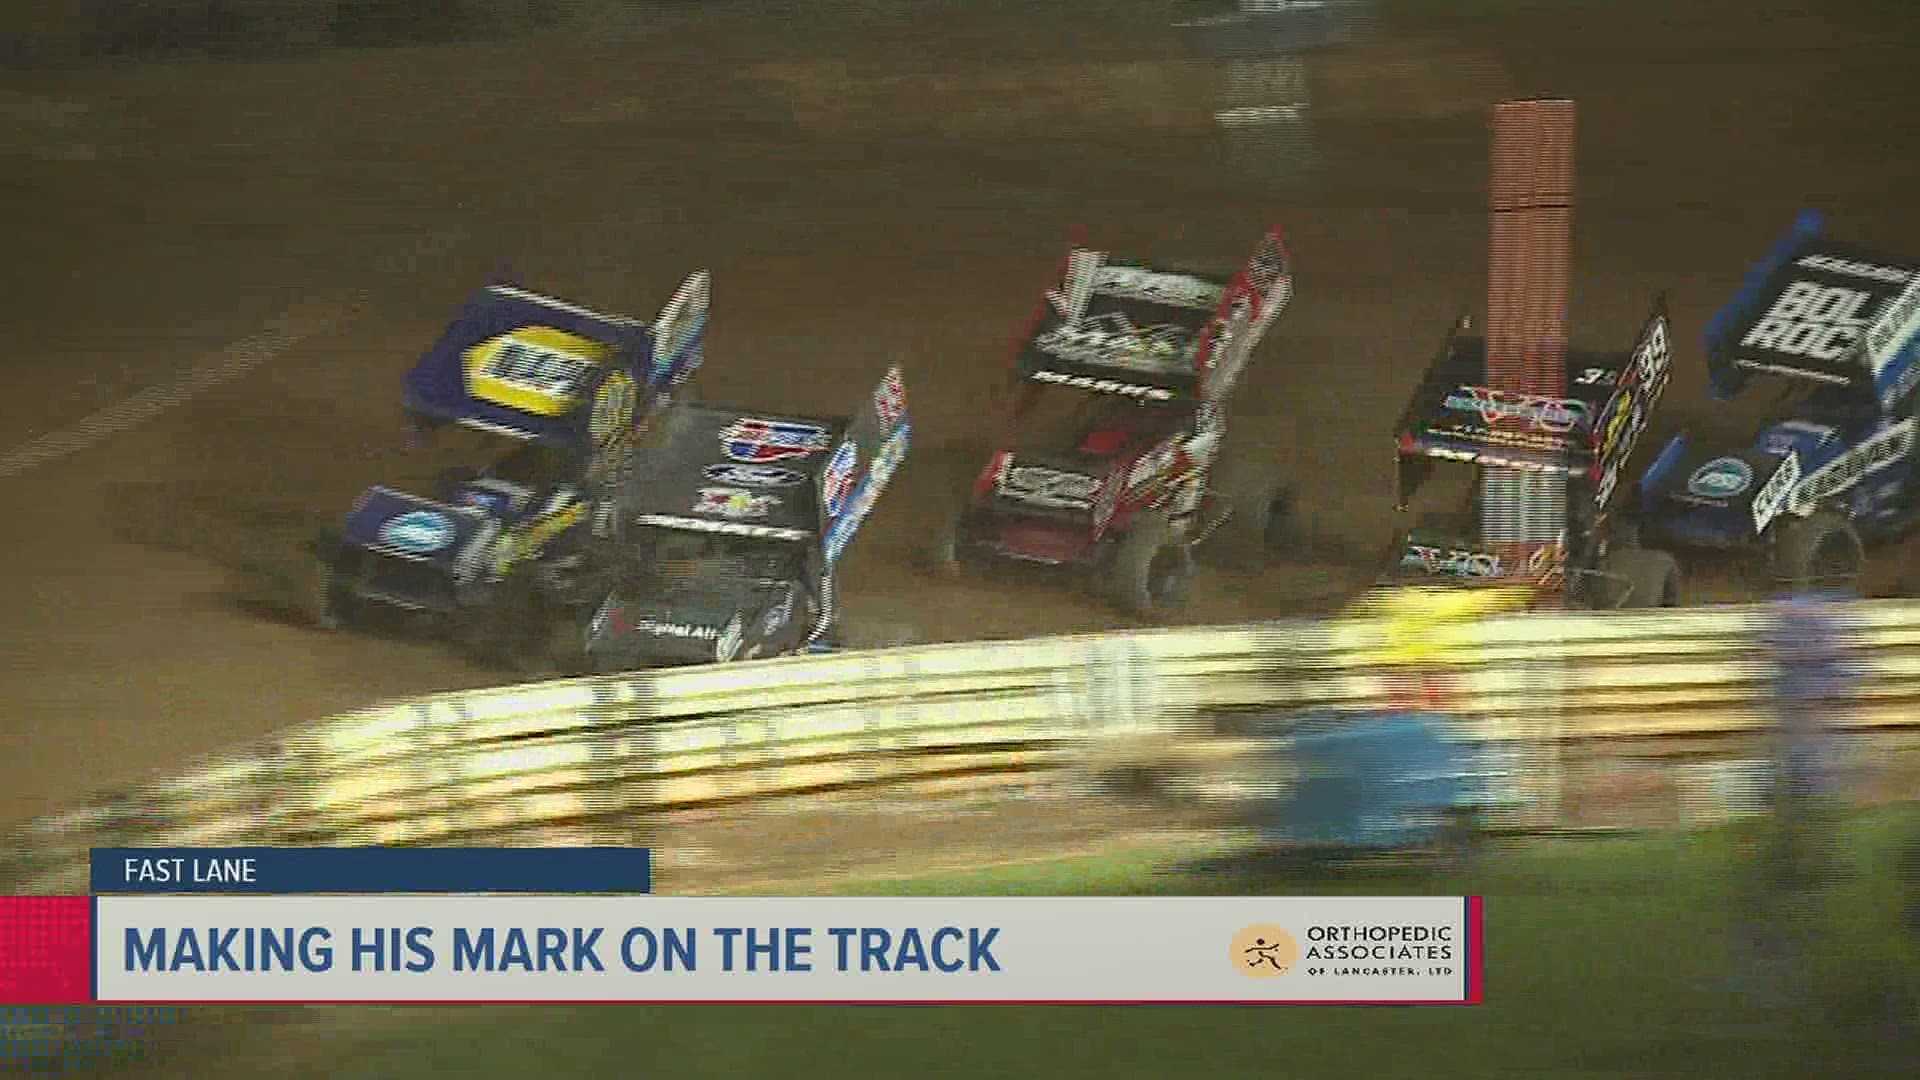 The World of Outlaws sweep their first trip to Central Pa.